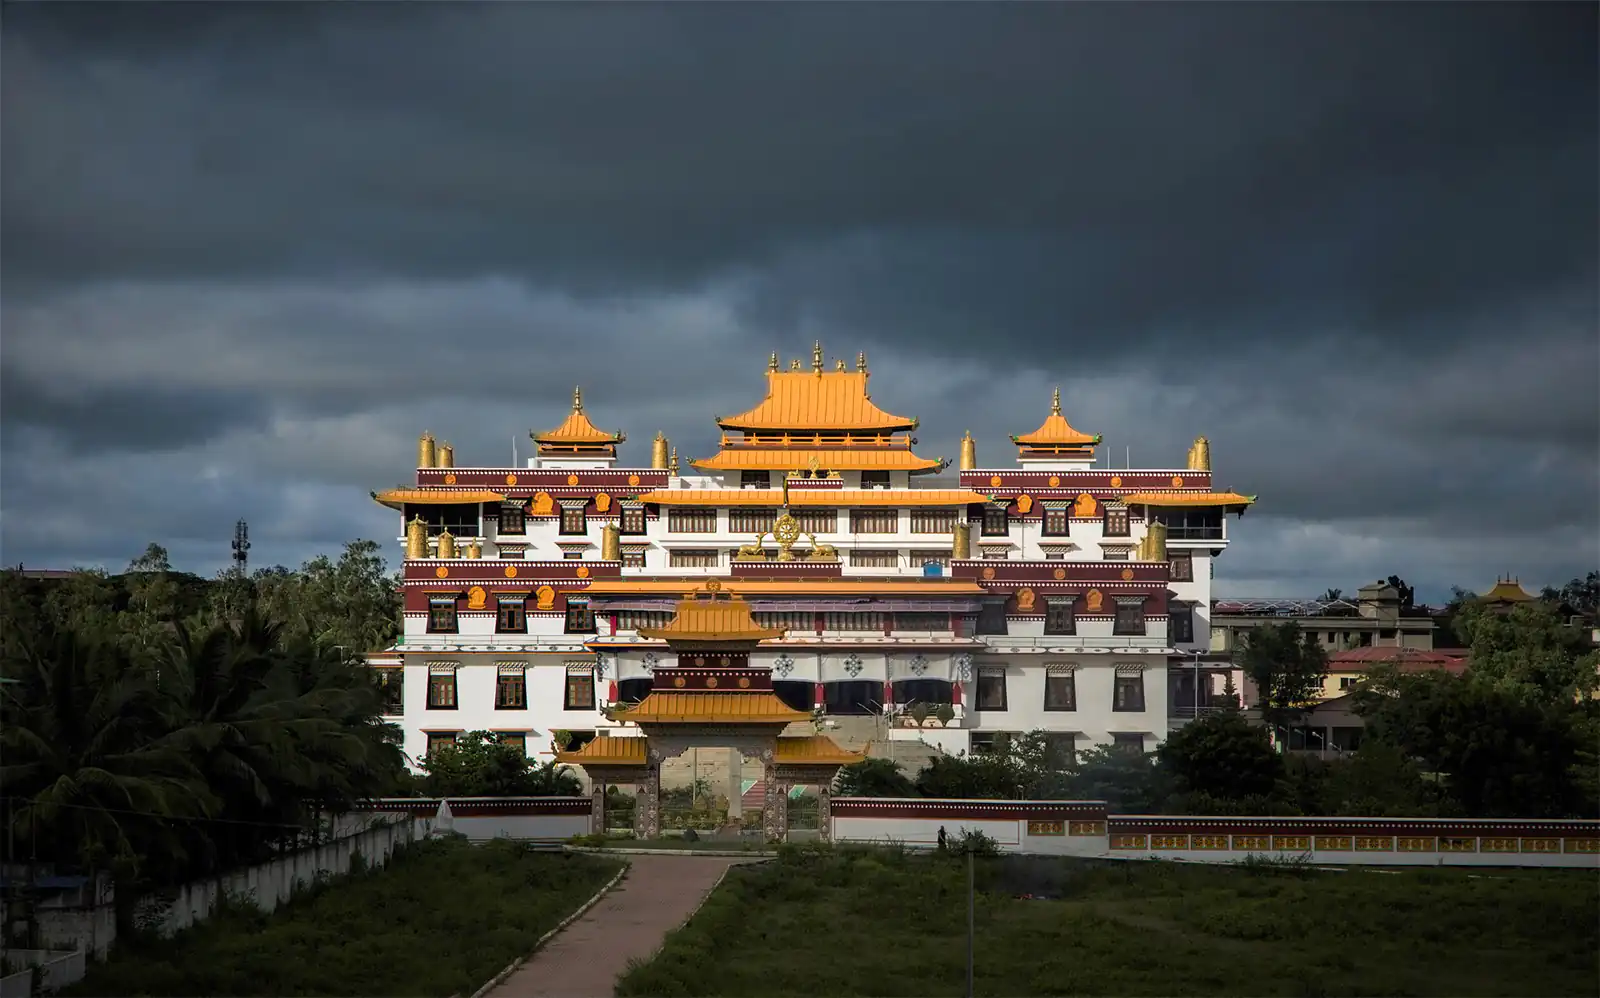 Drepung Loseling at Mundgod Kanataka. Their prominent place of worship. Drepung is one of the three most prominent monastic universities for Tibetan Buddhists.